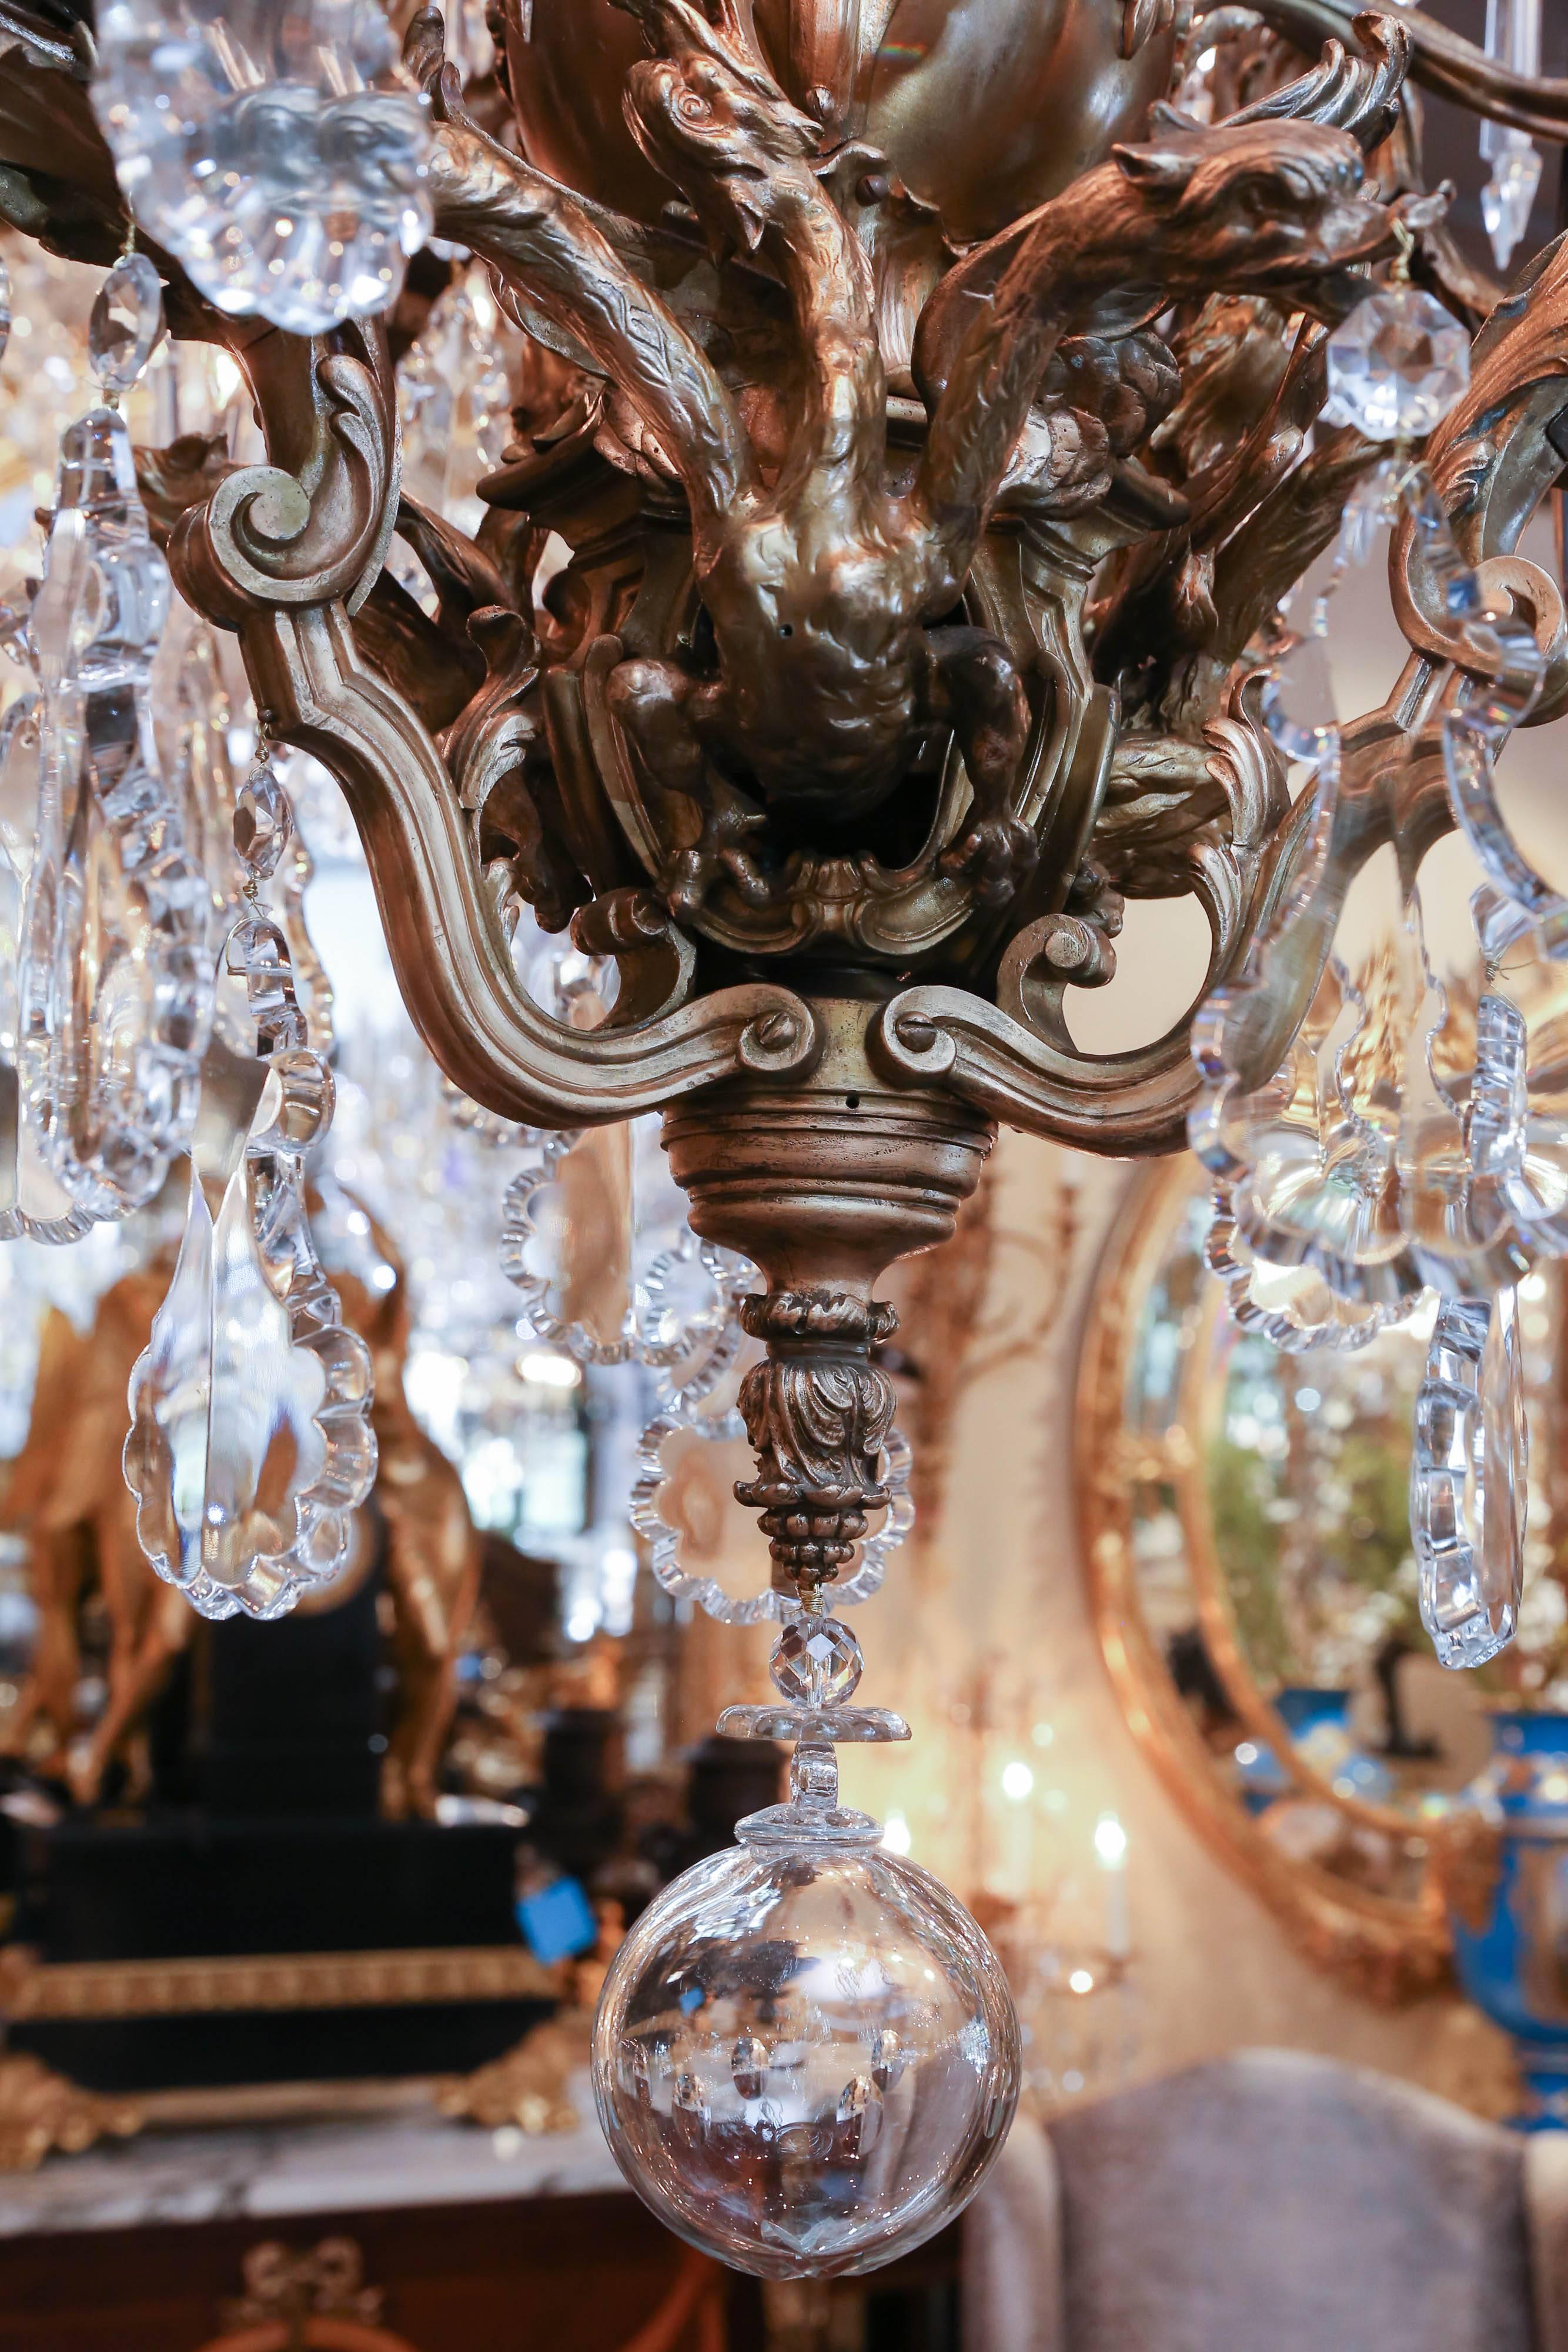 Scrolling arms with mounted winged putti, foliate forms
And winged griffins, wired beautiful large scale crystal
With notched crystal on the bobeches
Antique bronze with original patina.